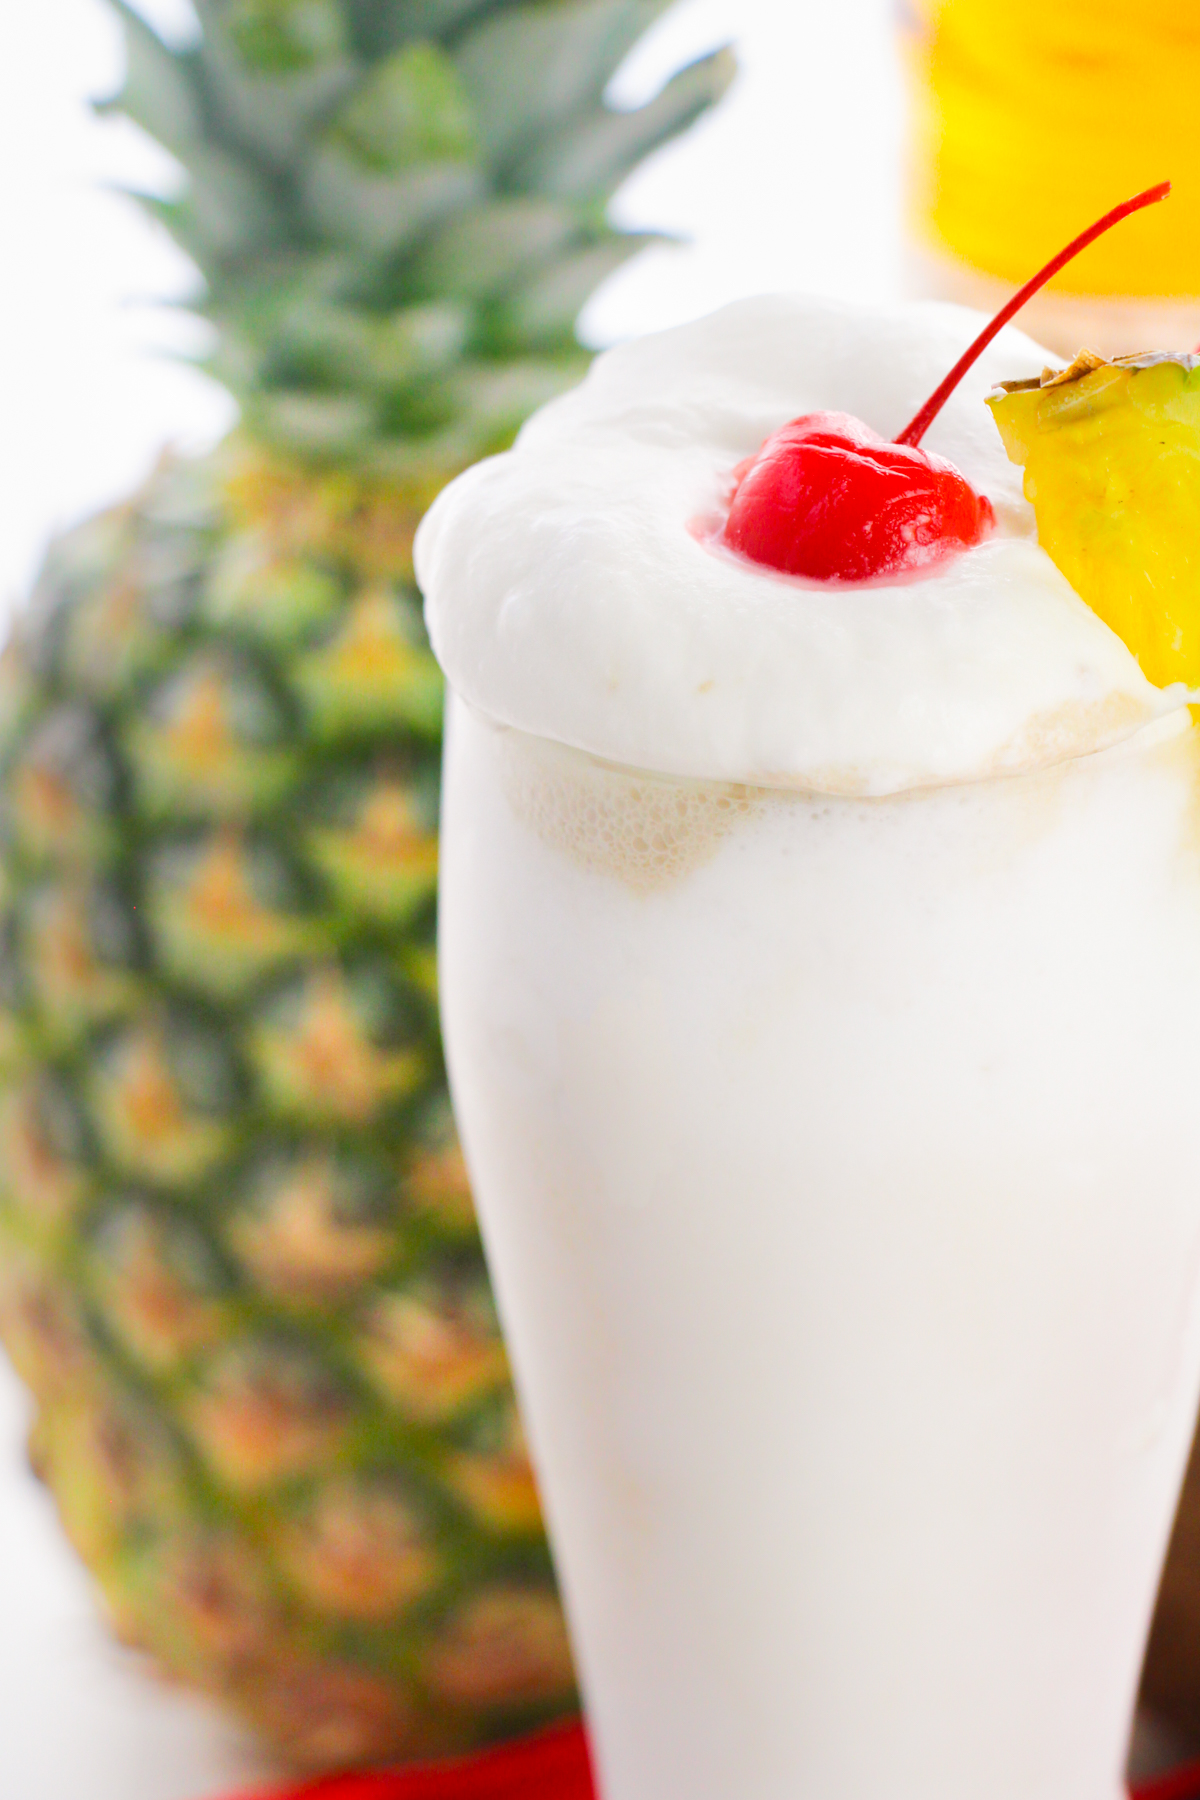 Pina colada with fresh pineapple in the background.